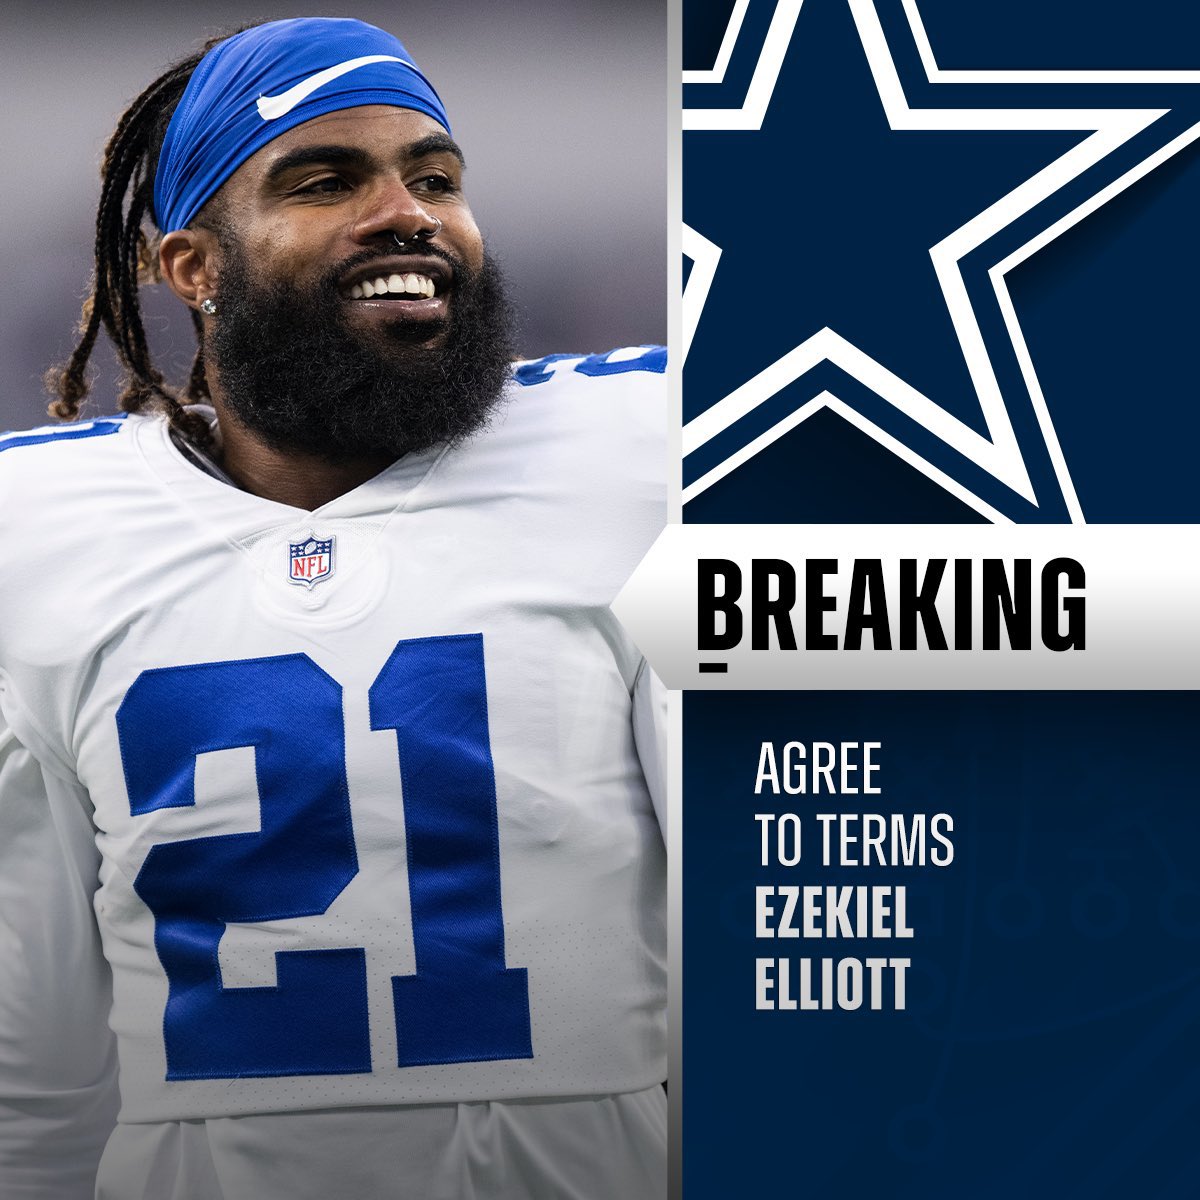 Cowboys, RB Ezekiel Elliott agree to terms on a 1 year deal, pending physical.  Contracts Is valued at max 3M 

#EzekielElliot
#DallasCowboys #Nfl #HesBack #FeedMe